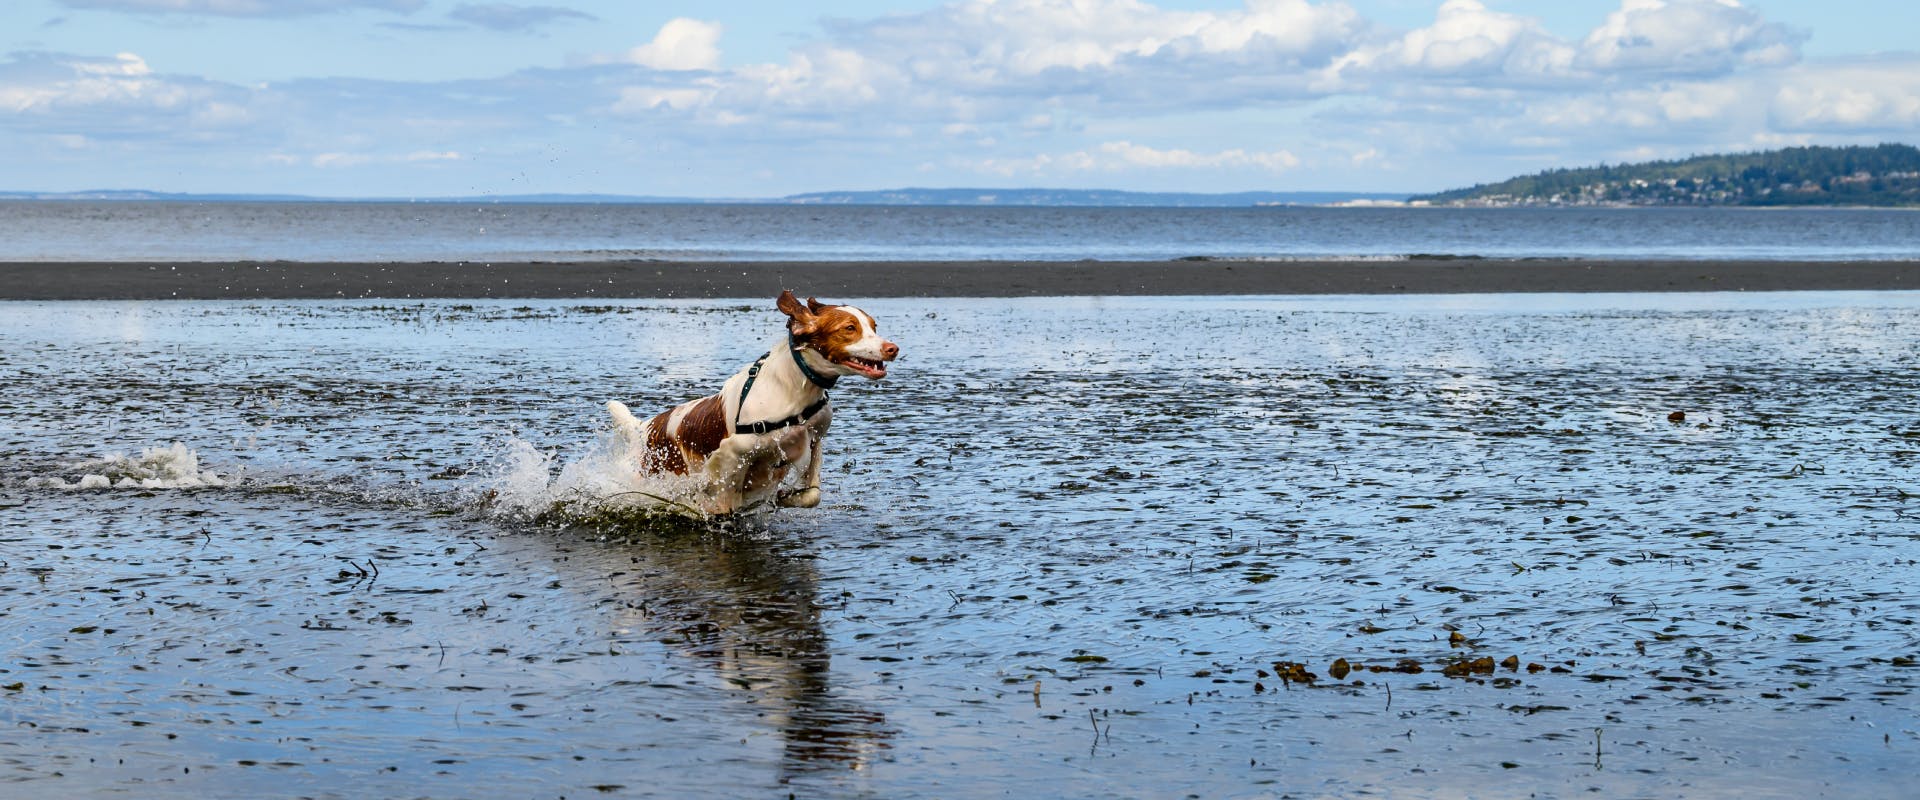 a young brown and white dog with a harness on splashing through the shoreline just off Seattle